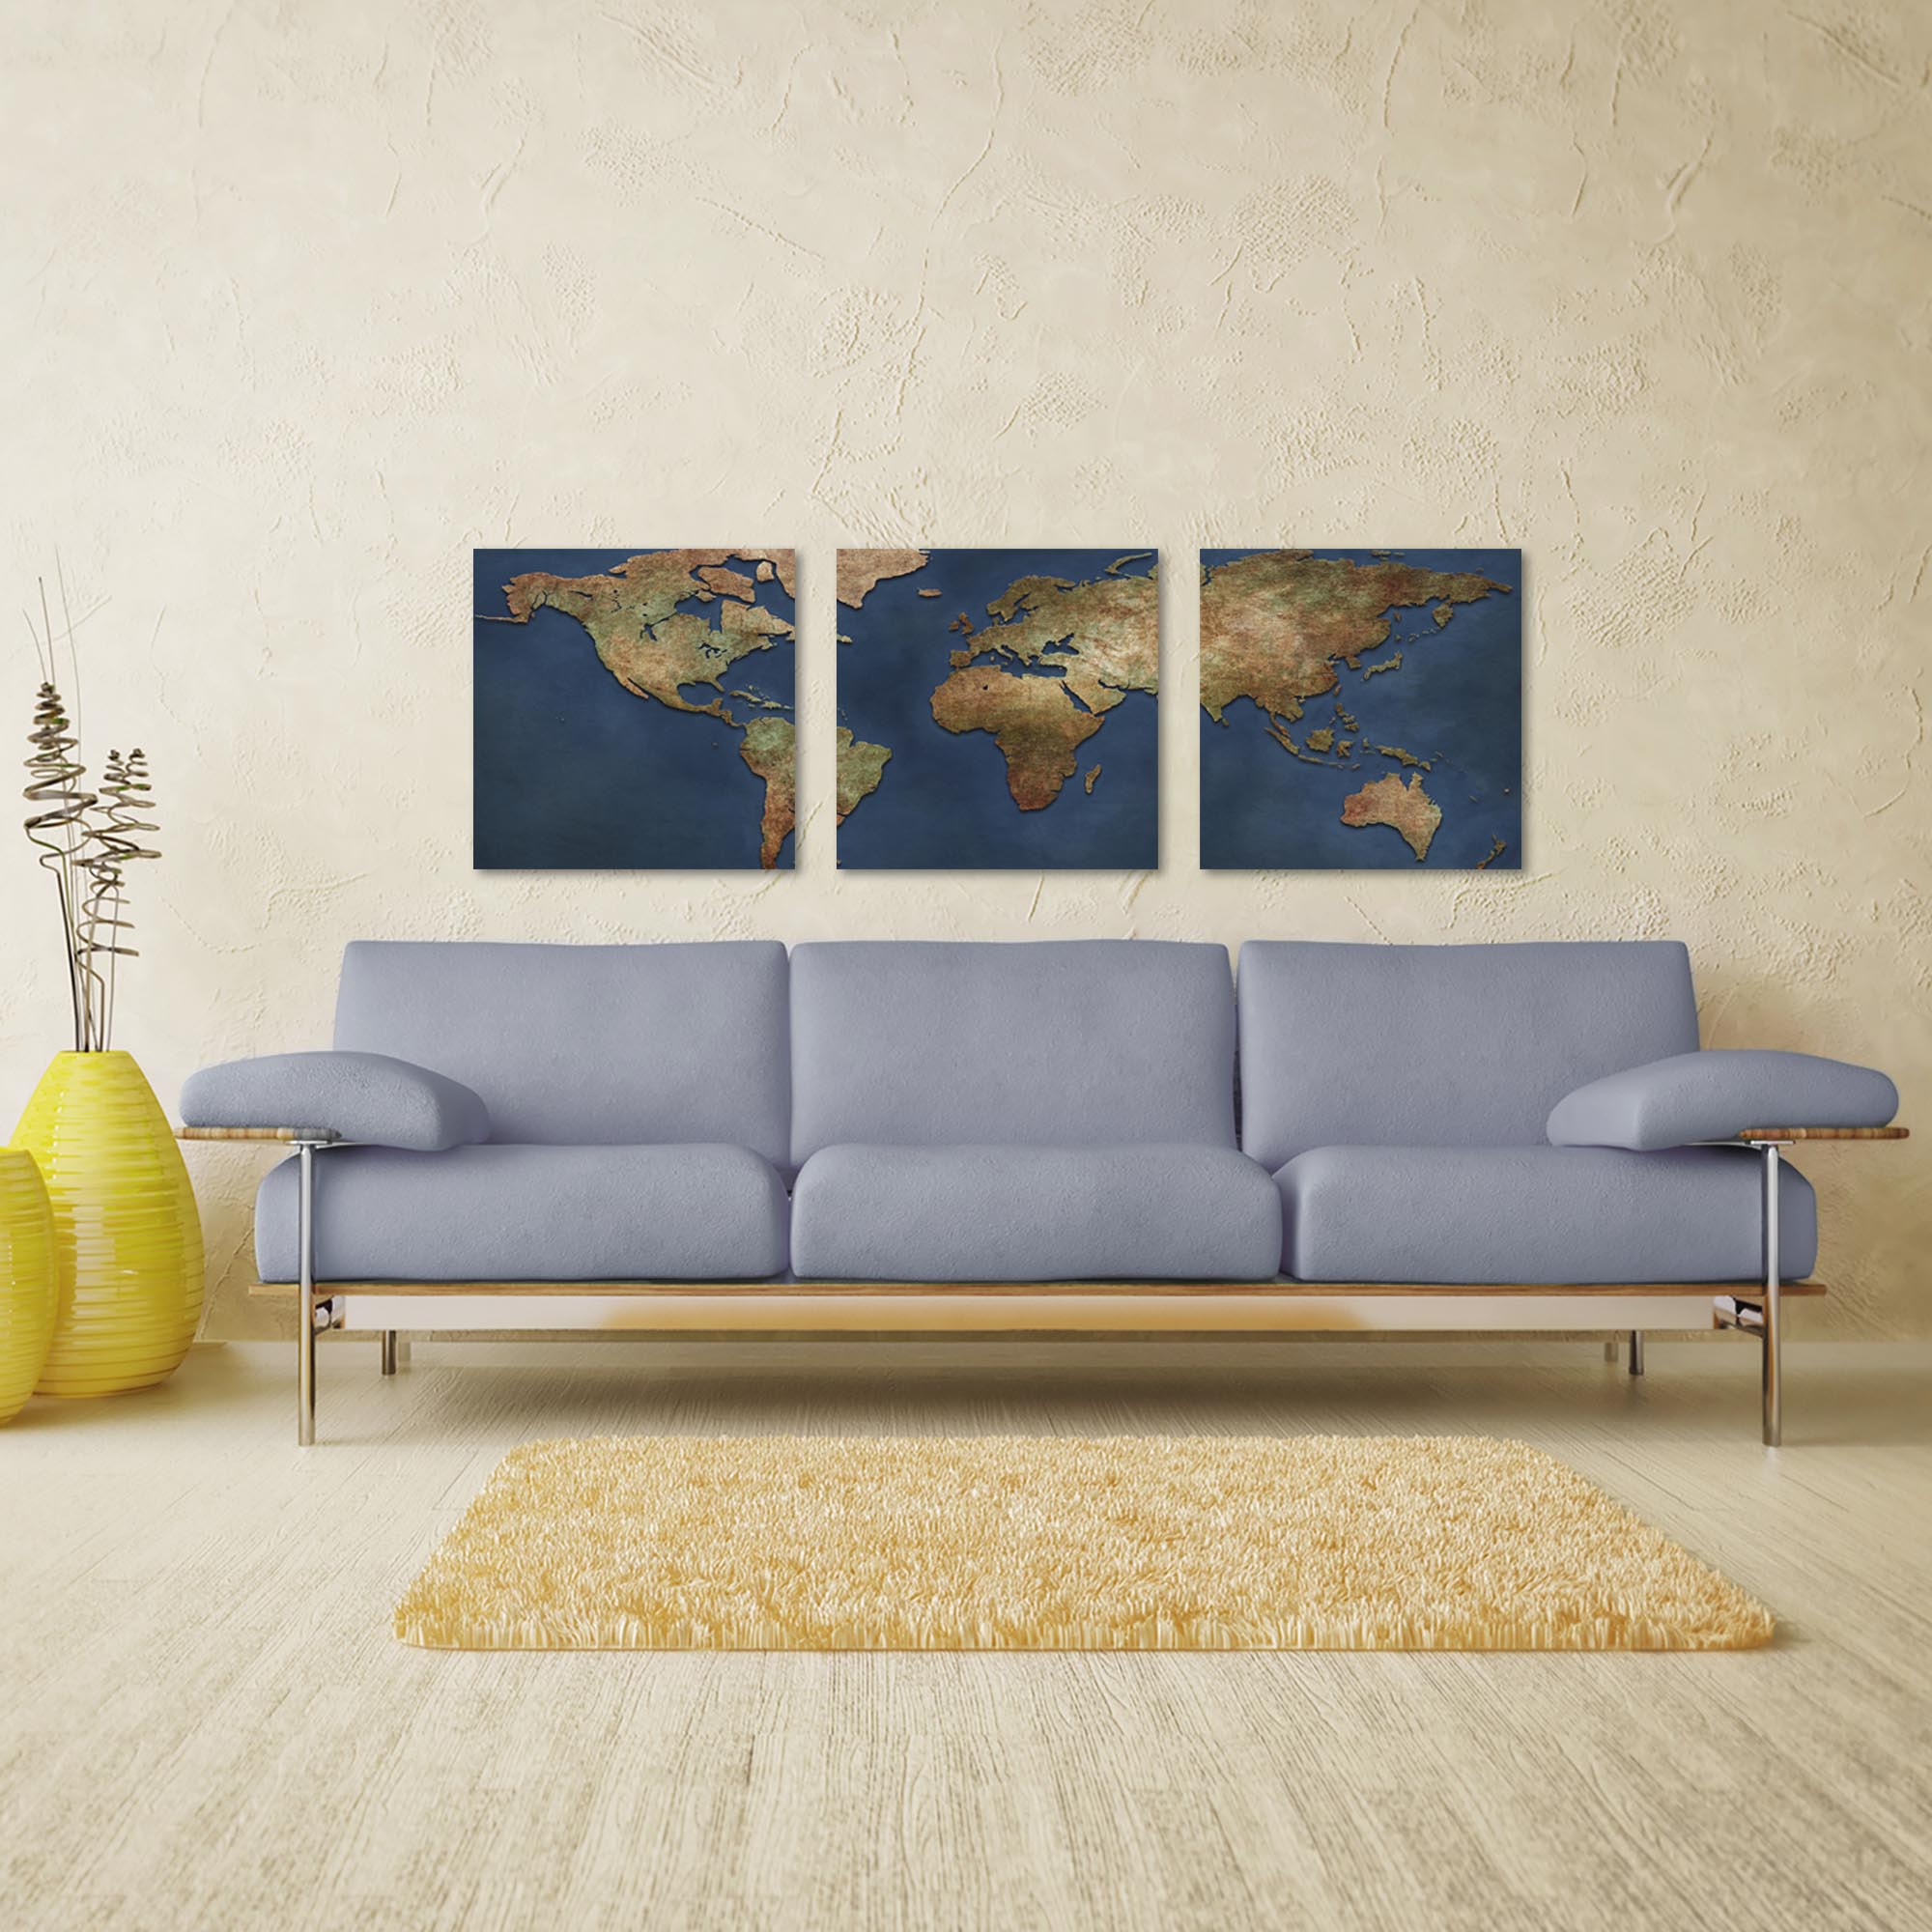 1800s World Map Triptych Large 70x22in. Metal or Acrylic Colonial Decor - Lifestyle View